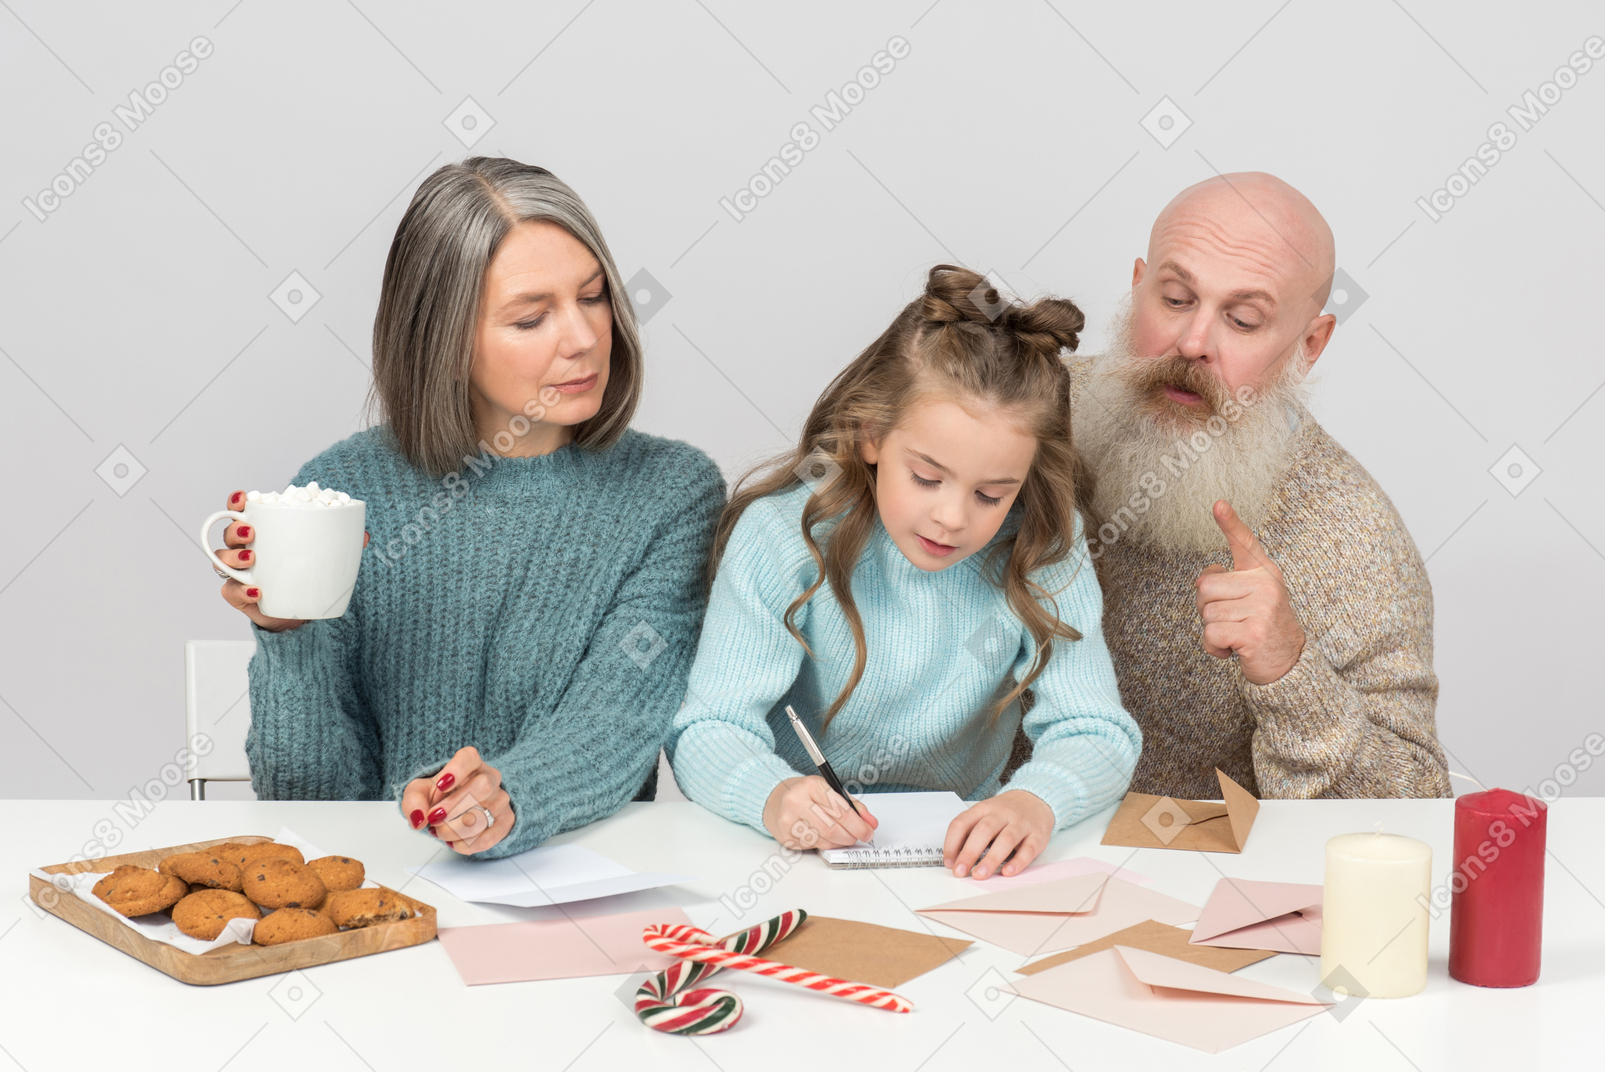 Kid girl signs card and grandpa tells her what to write